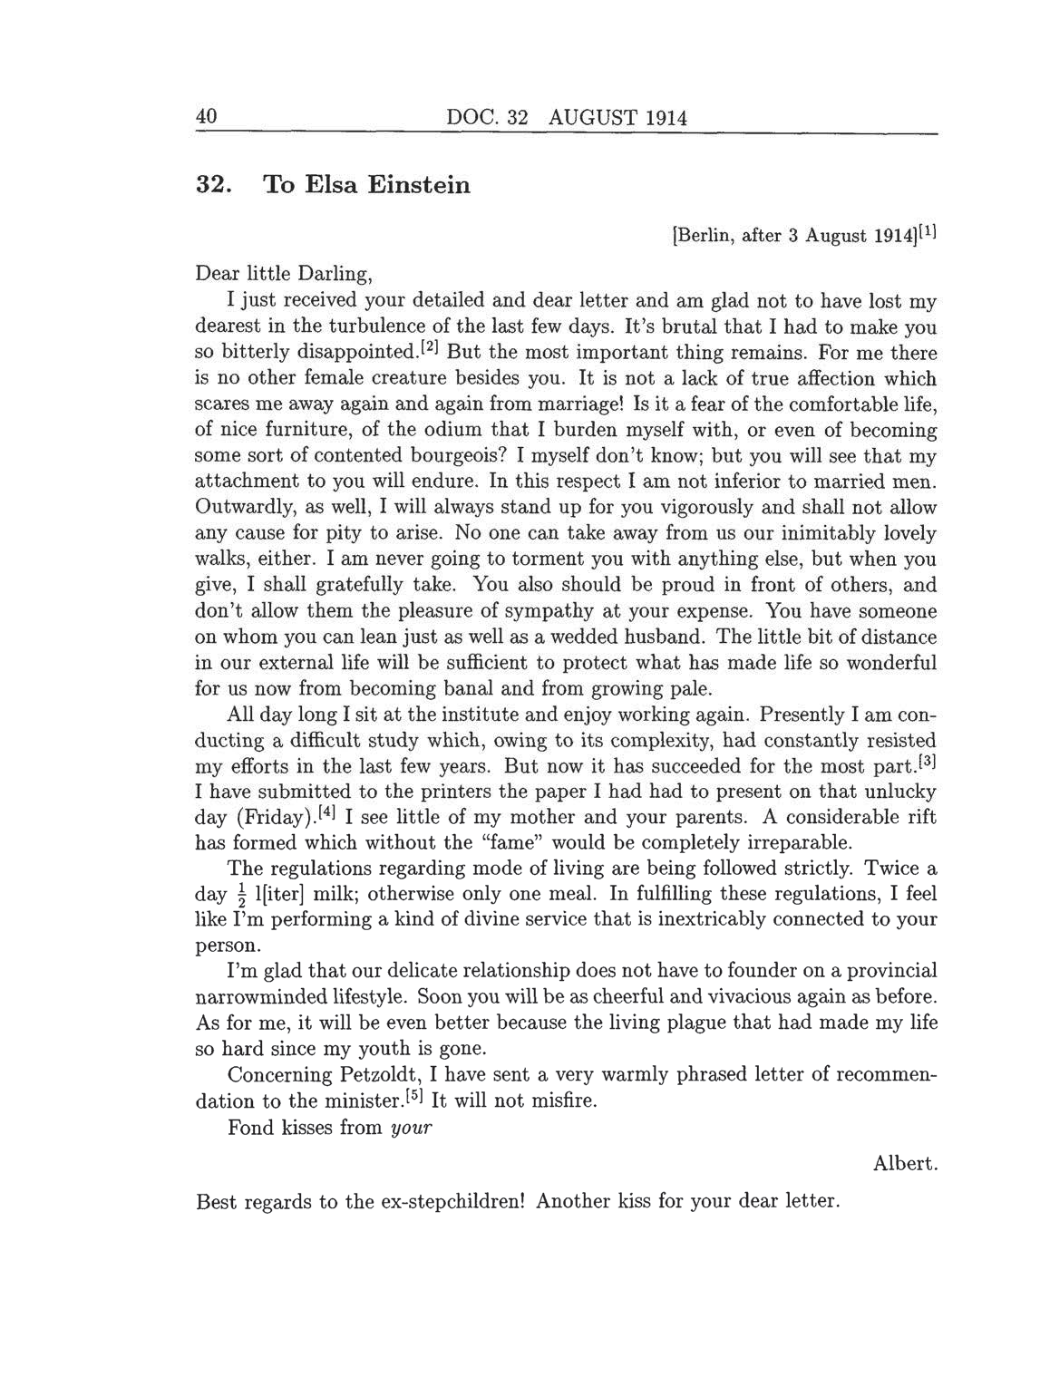 Volume 8: The Berlin Years: Correspondence, 1914-1918 (English translation supplement) page 40